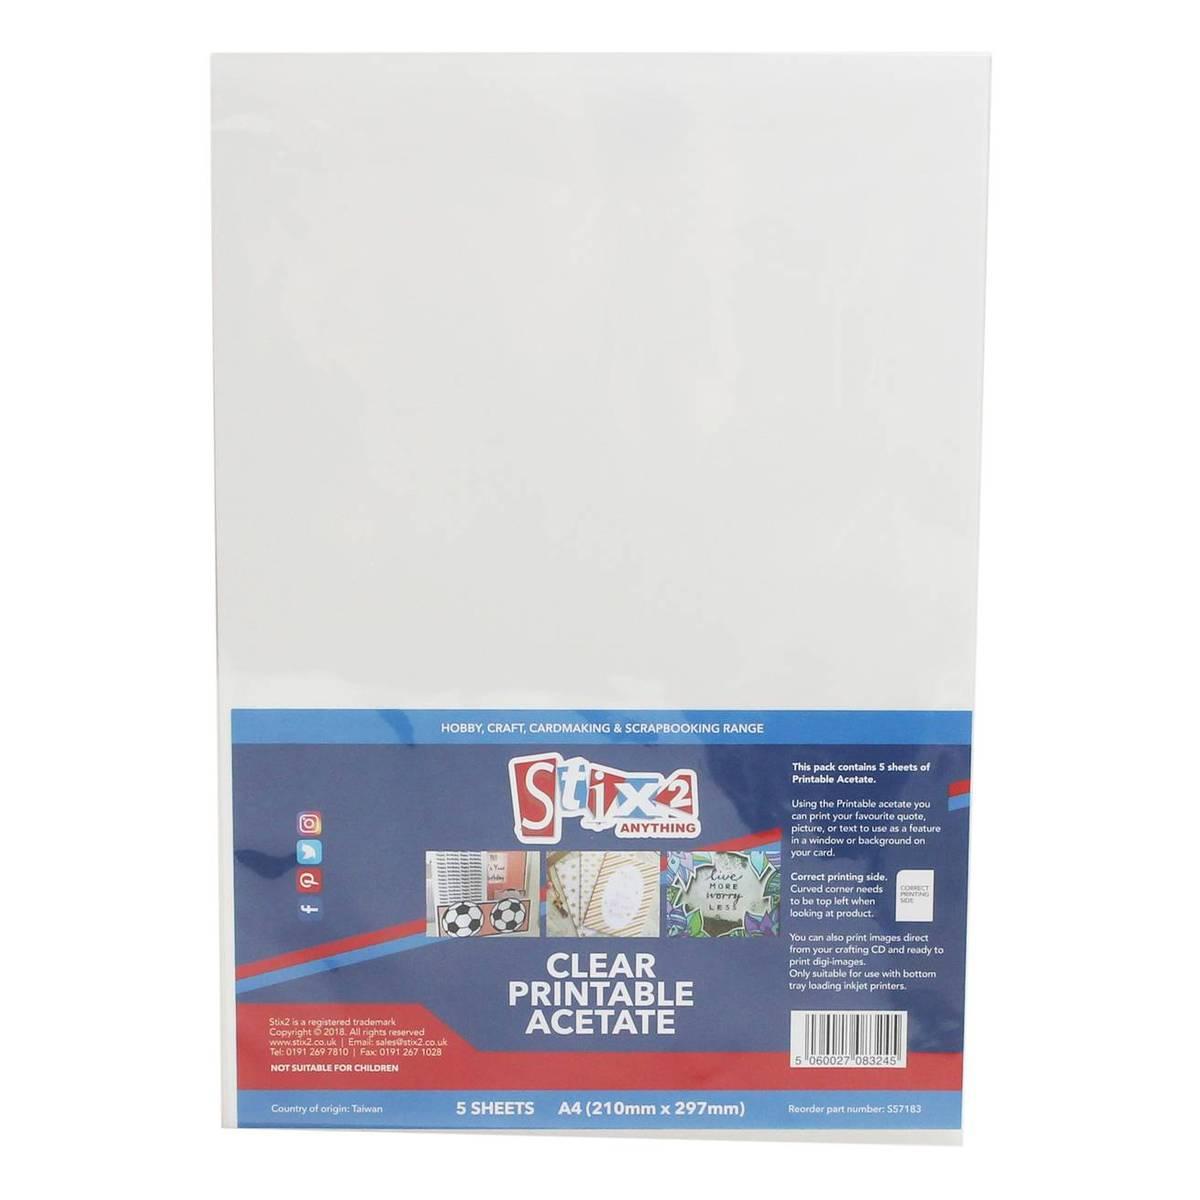 2 Anything Clear Printable Acetate Sheets A4 5 Pack | Hobbycraft